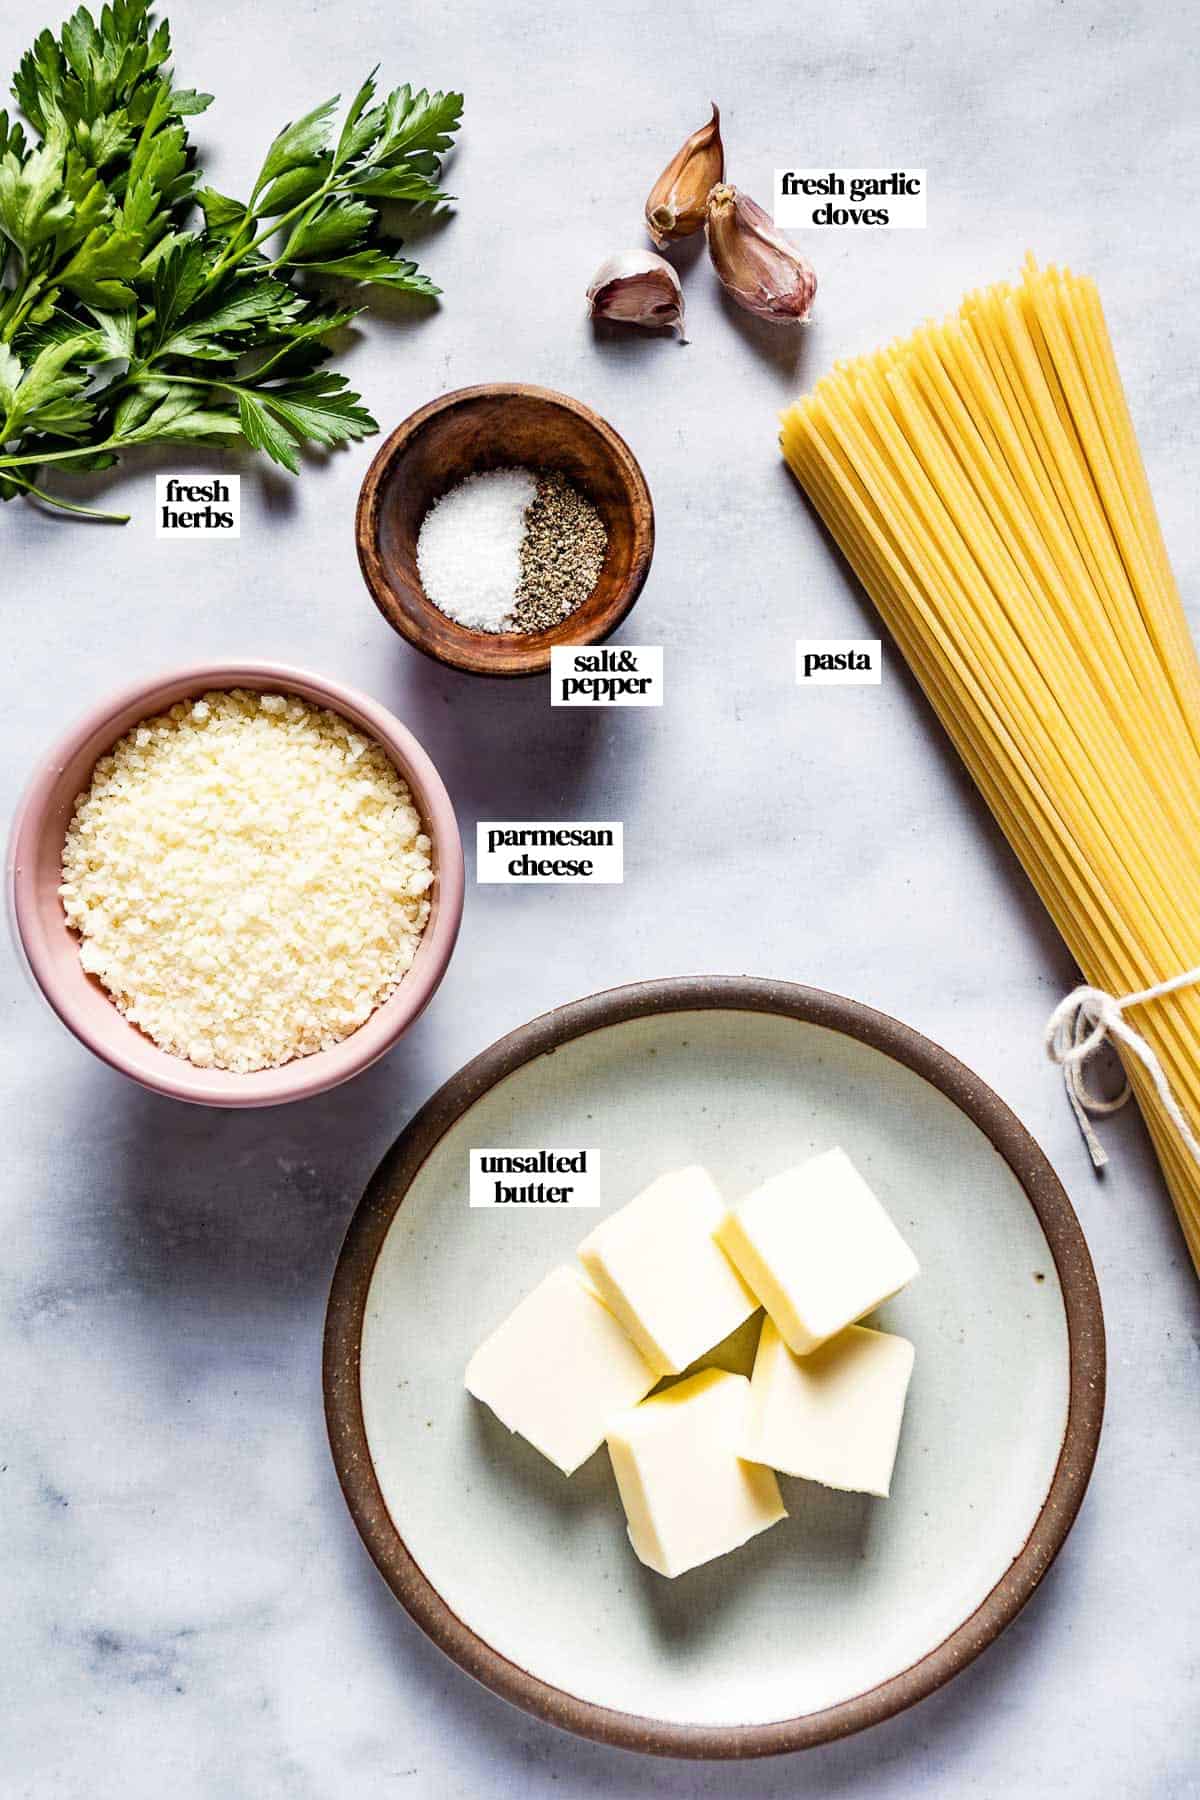 Ingredients for pasta with butter garlic from the top view.